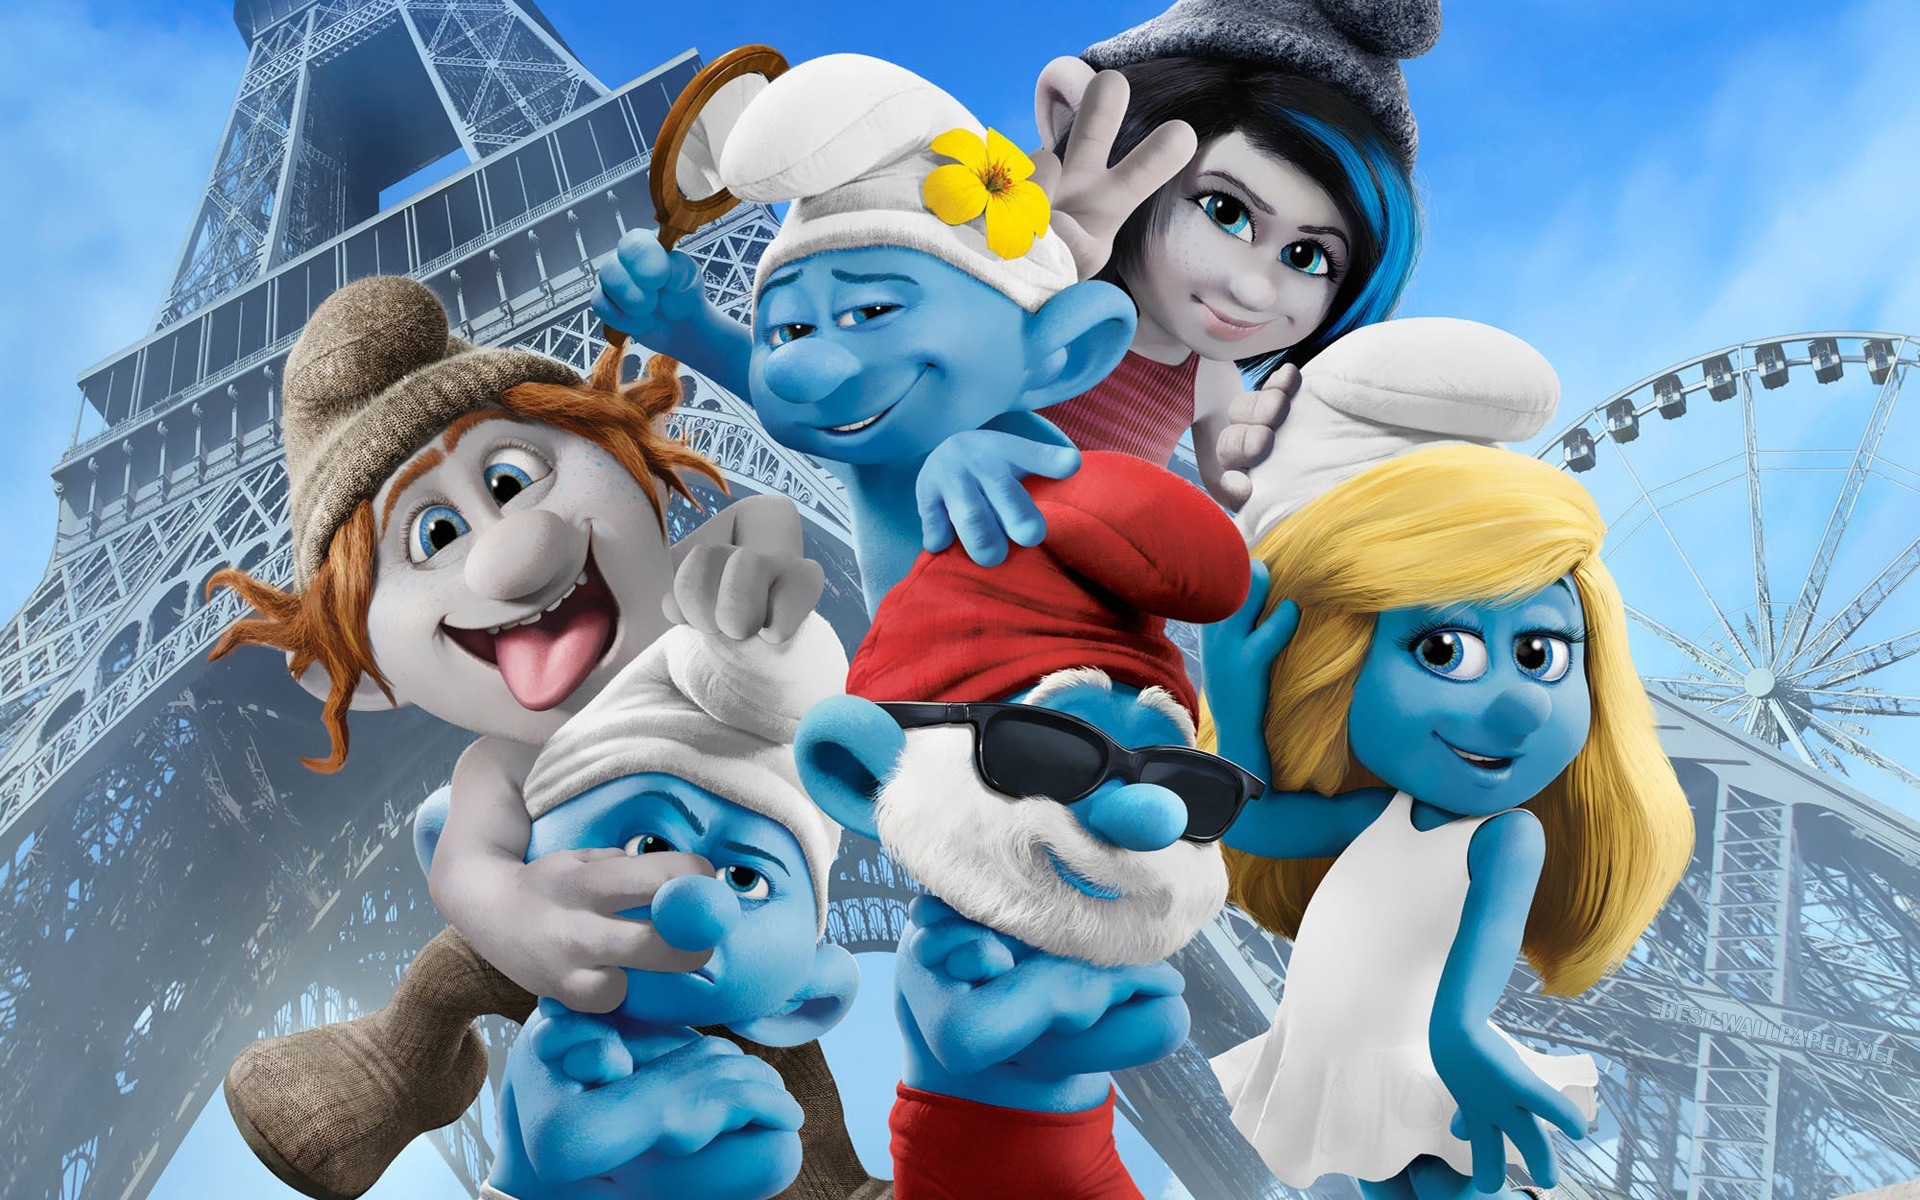 The Smurfs 2 HD movie wallpapers #7 - 1920x1200